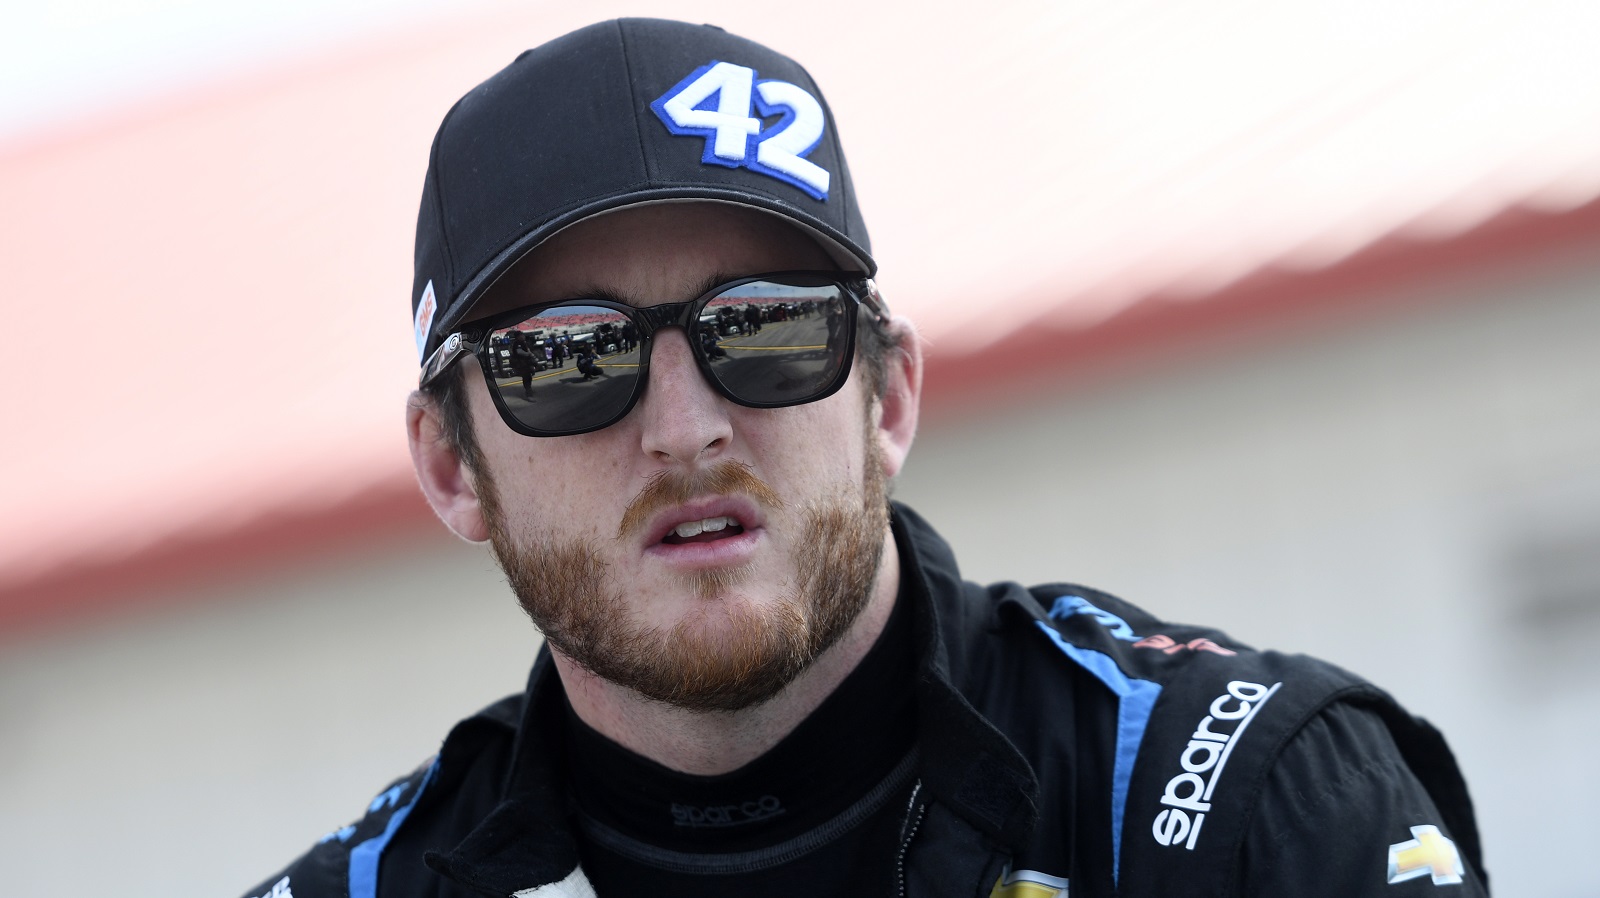 Ty Dillon looks on during qualifying for the NASCAR Cup Series Inaugural Enjoy Illinois 300 on June 4, 2022, at World Wide Technology Raceway. | Michael Allio/Icon Sportswire via Getty Images